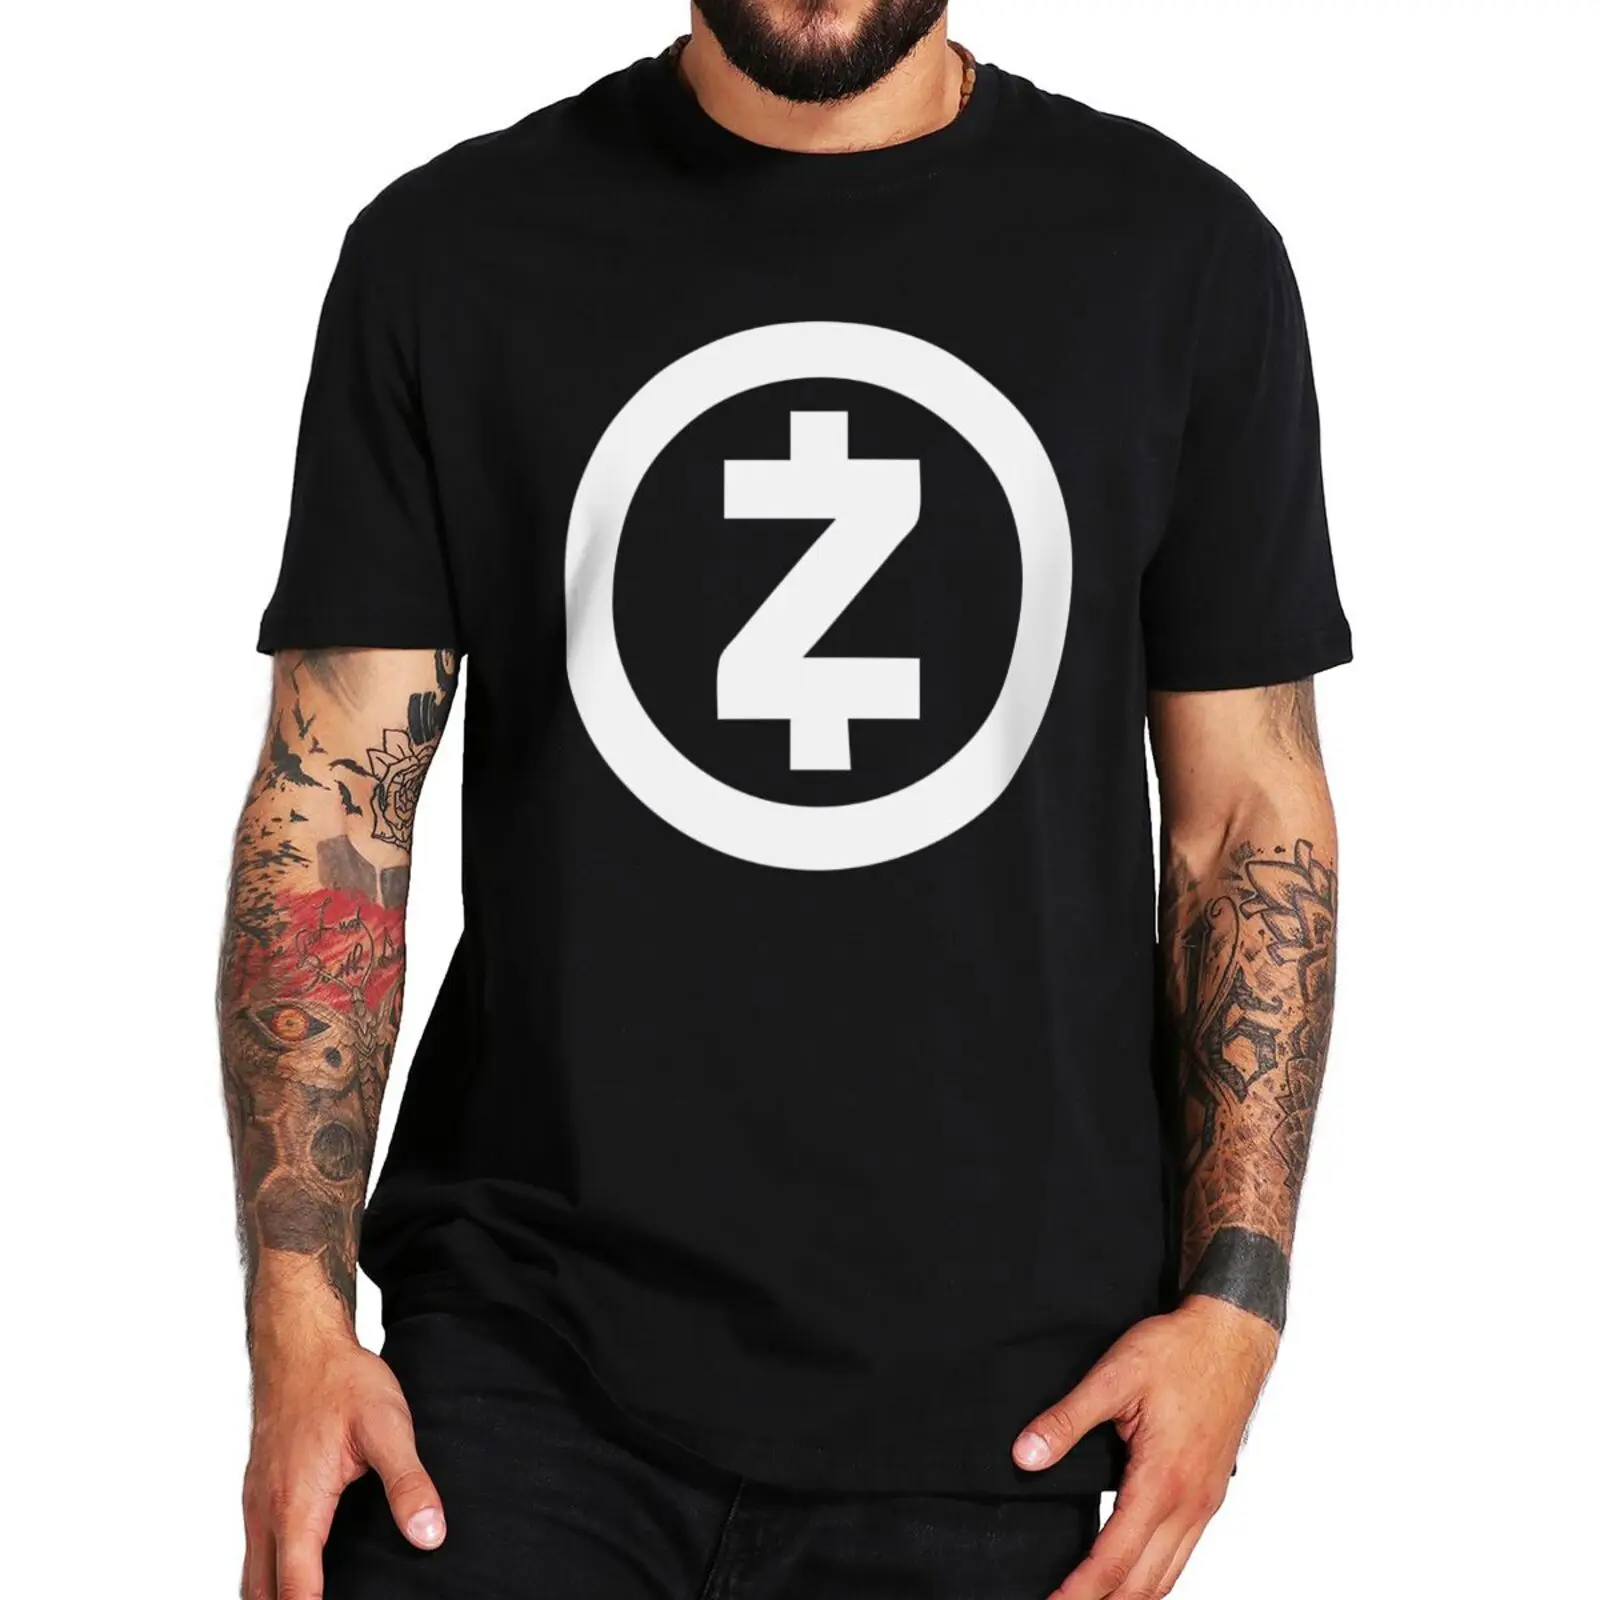 

Zcash Crypto T-Shirt ZEC Cryptocurrency Token Coin Lovers Short Sleeve Cotton Premium Summer Casual T Shirt For Men EU Size